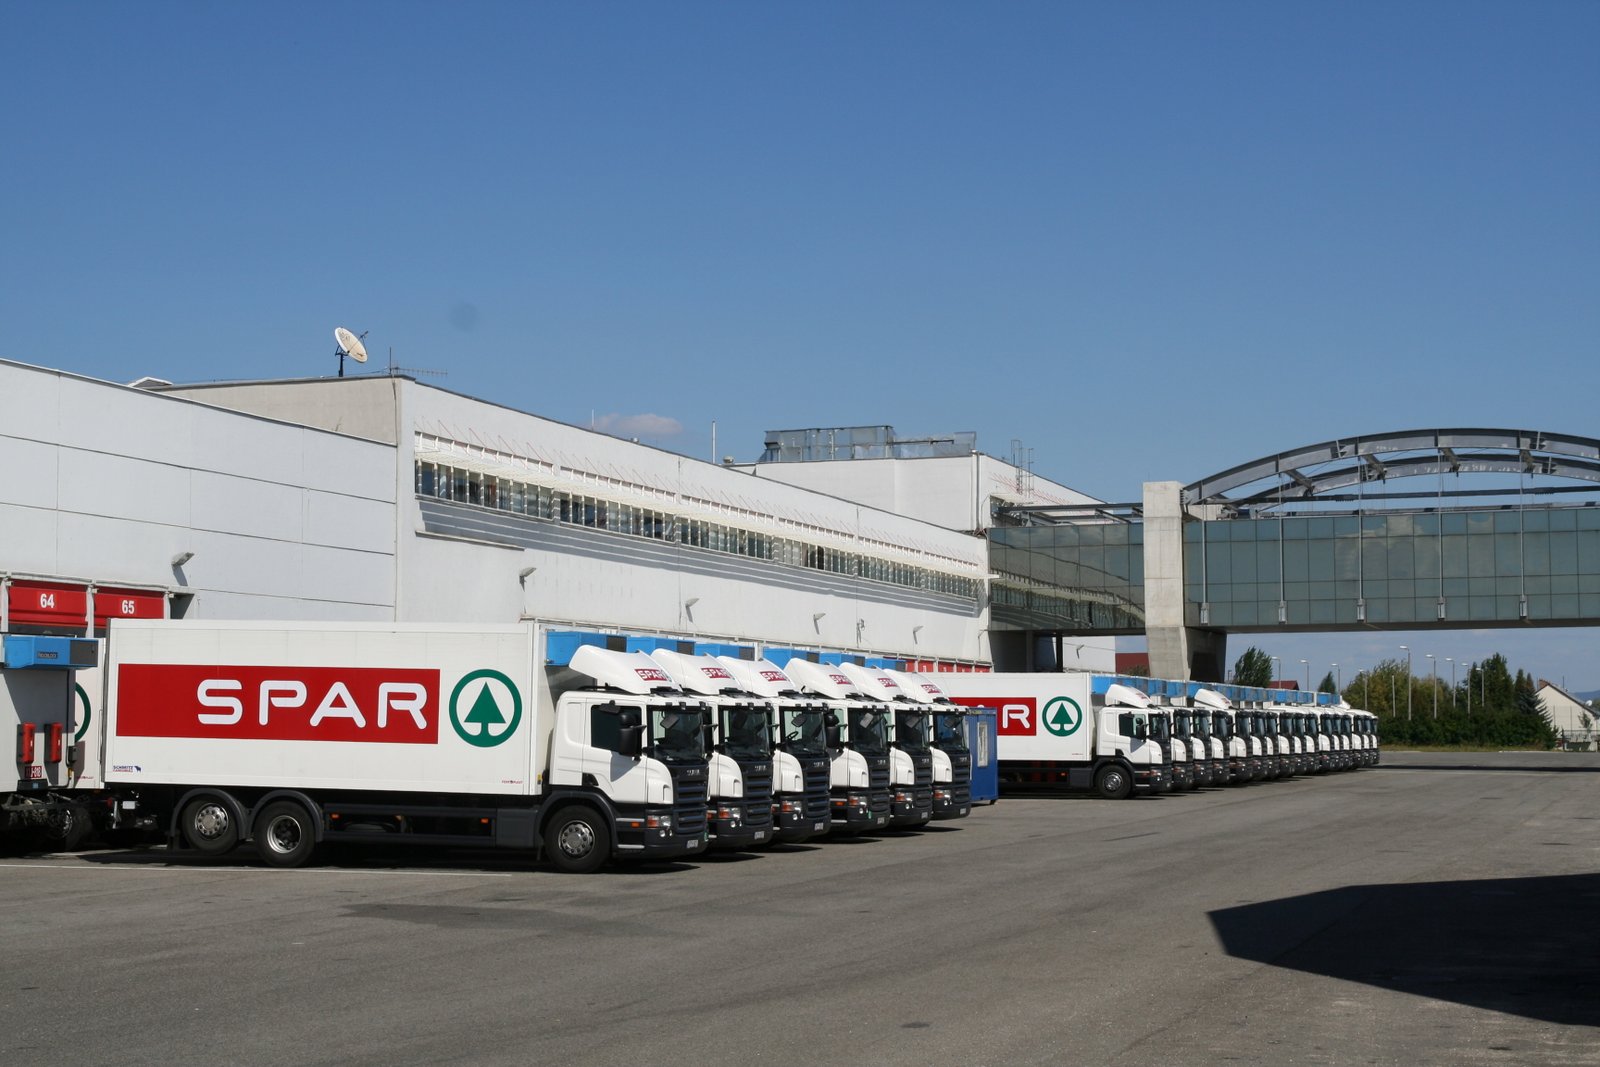 Spar reduces plastic used in logistics centers by 84 tonnes